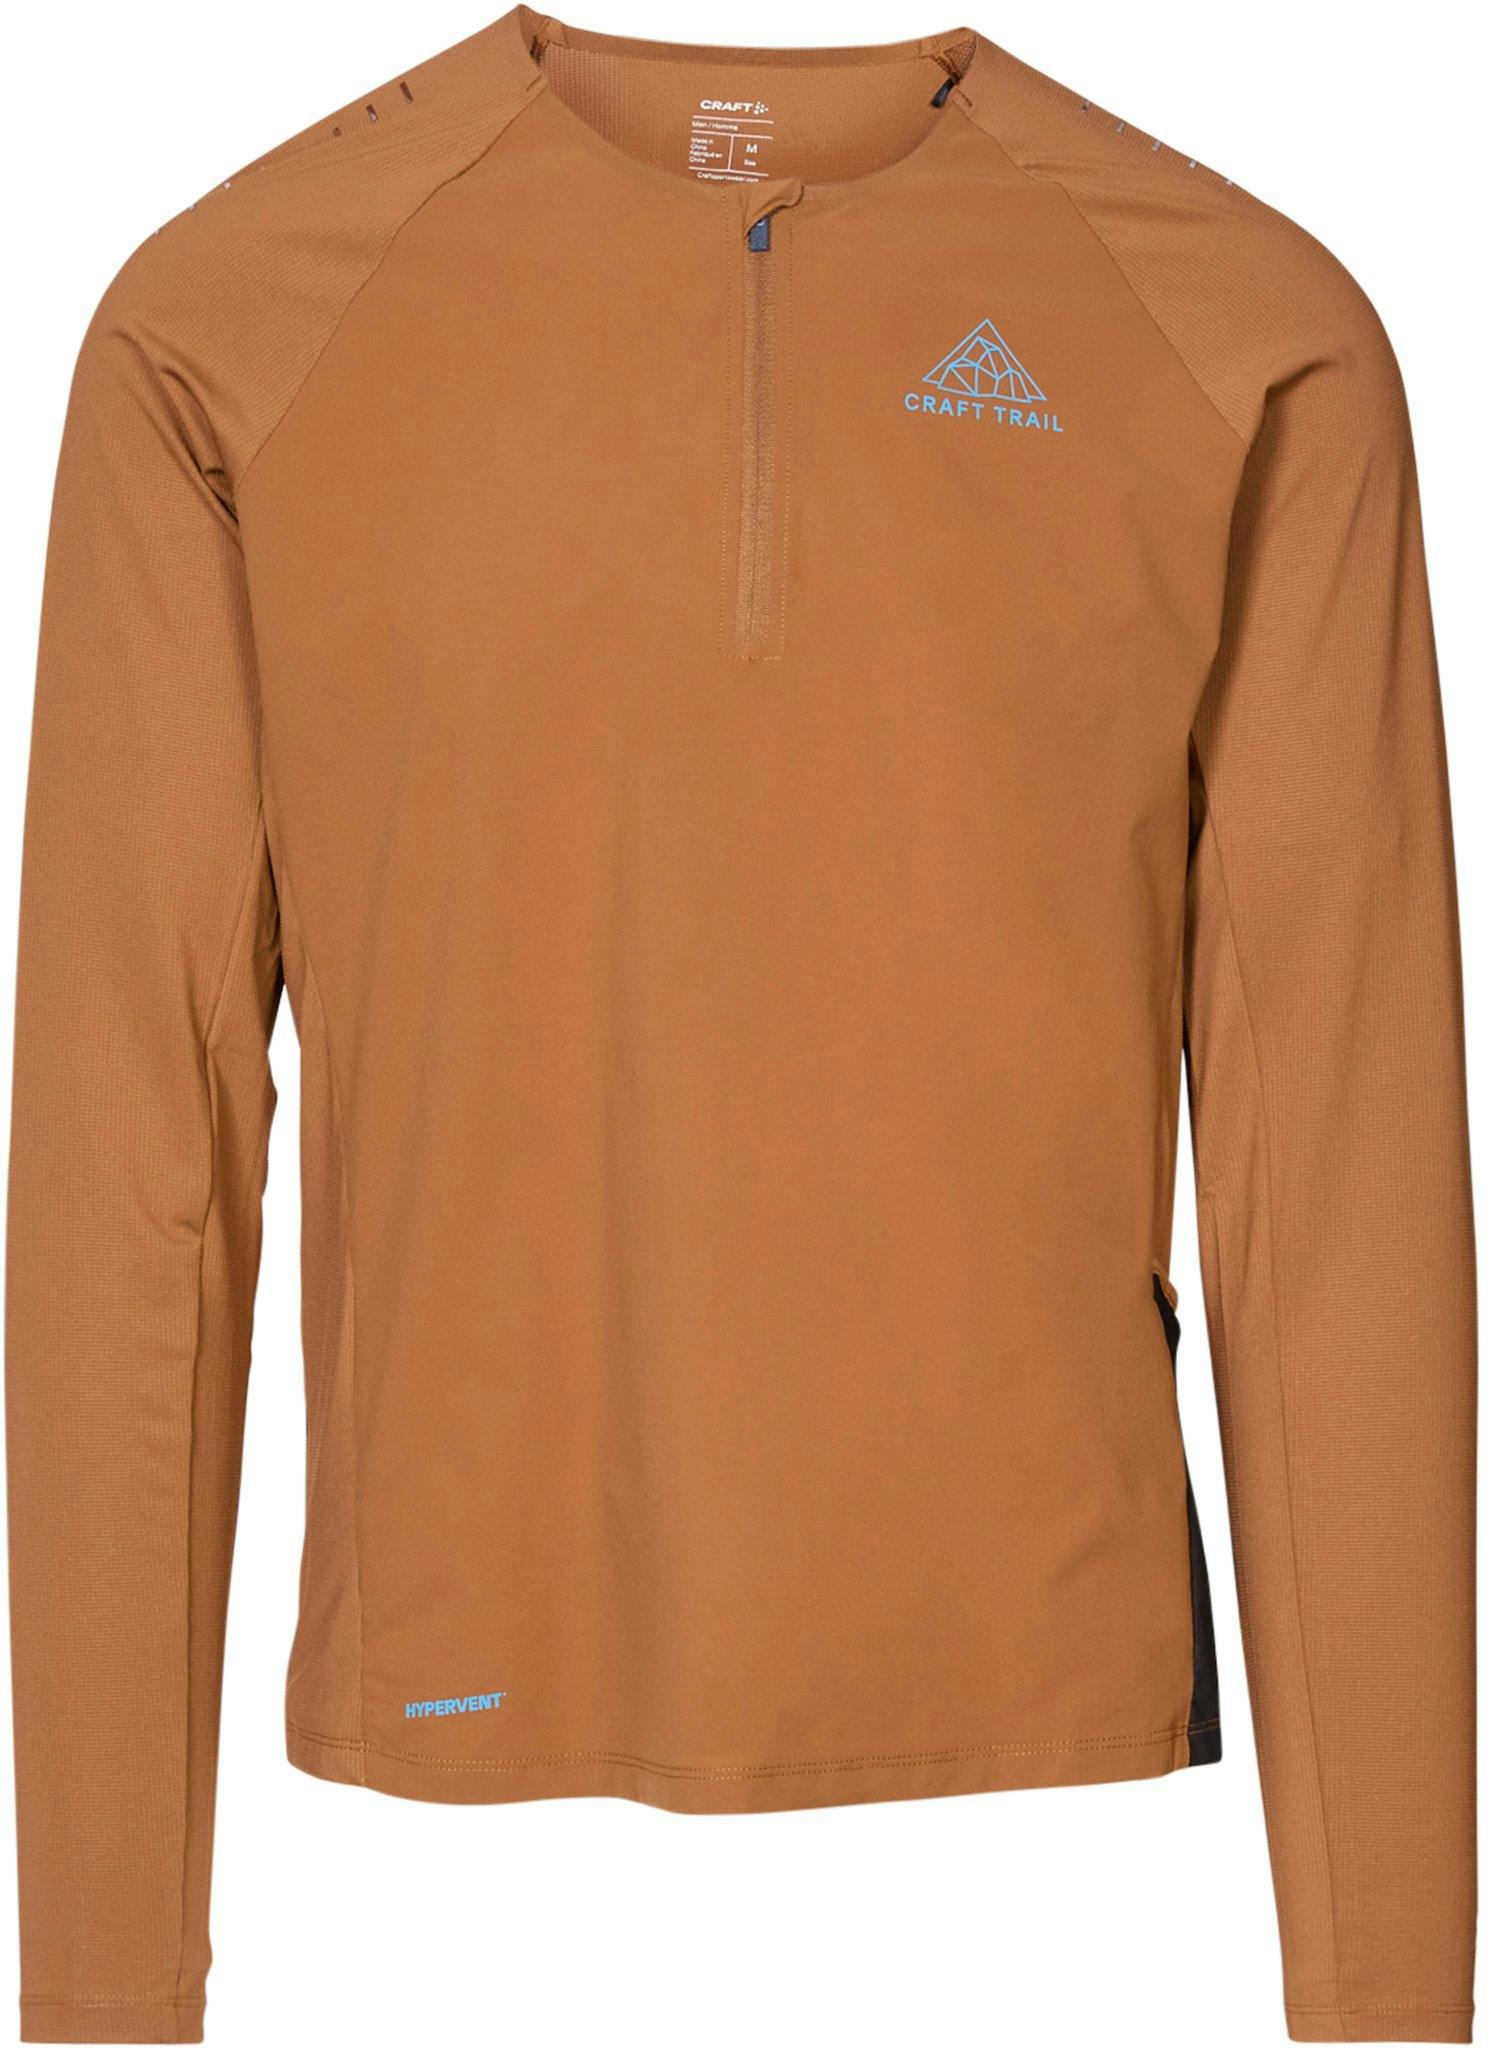 Product image for Pro Trail Wind Long Sleeve T-Shirt - Men's